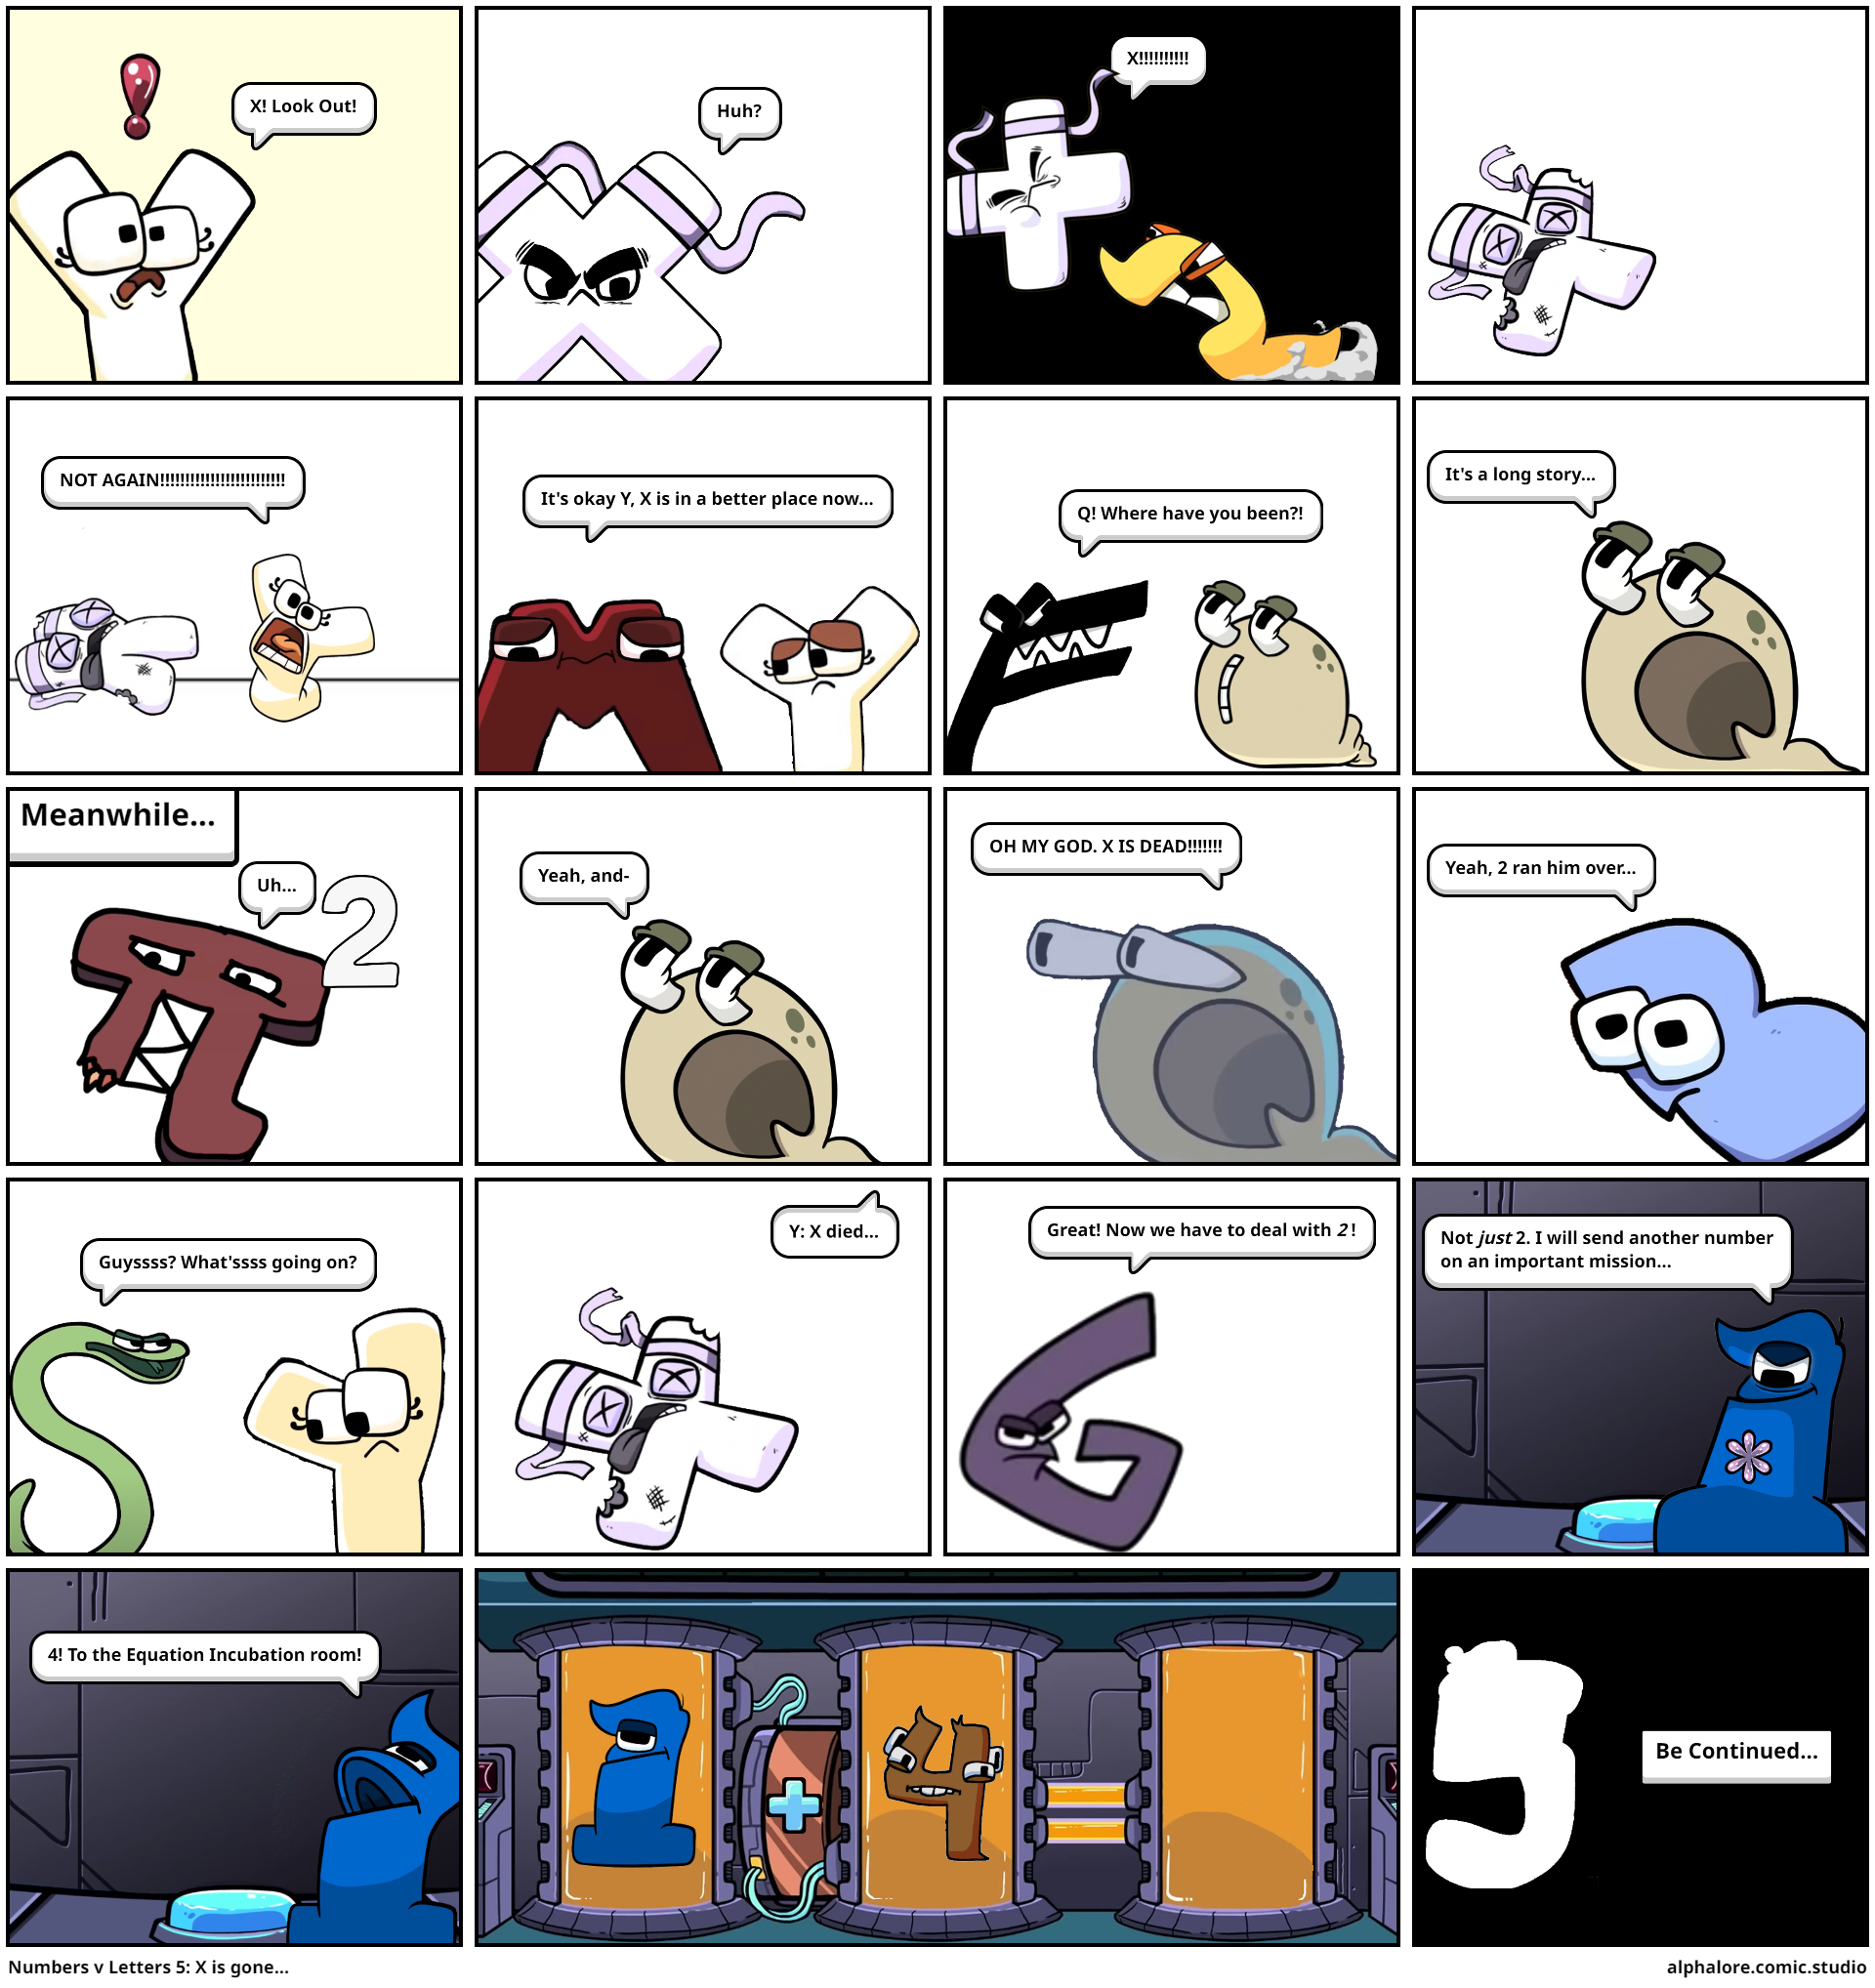 All The Extra Alphabet Lore Letters And Numbers - Comic Studio